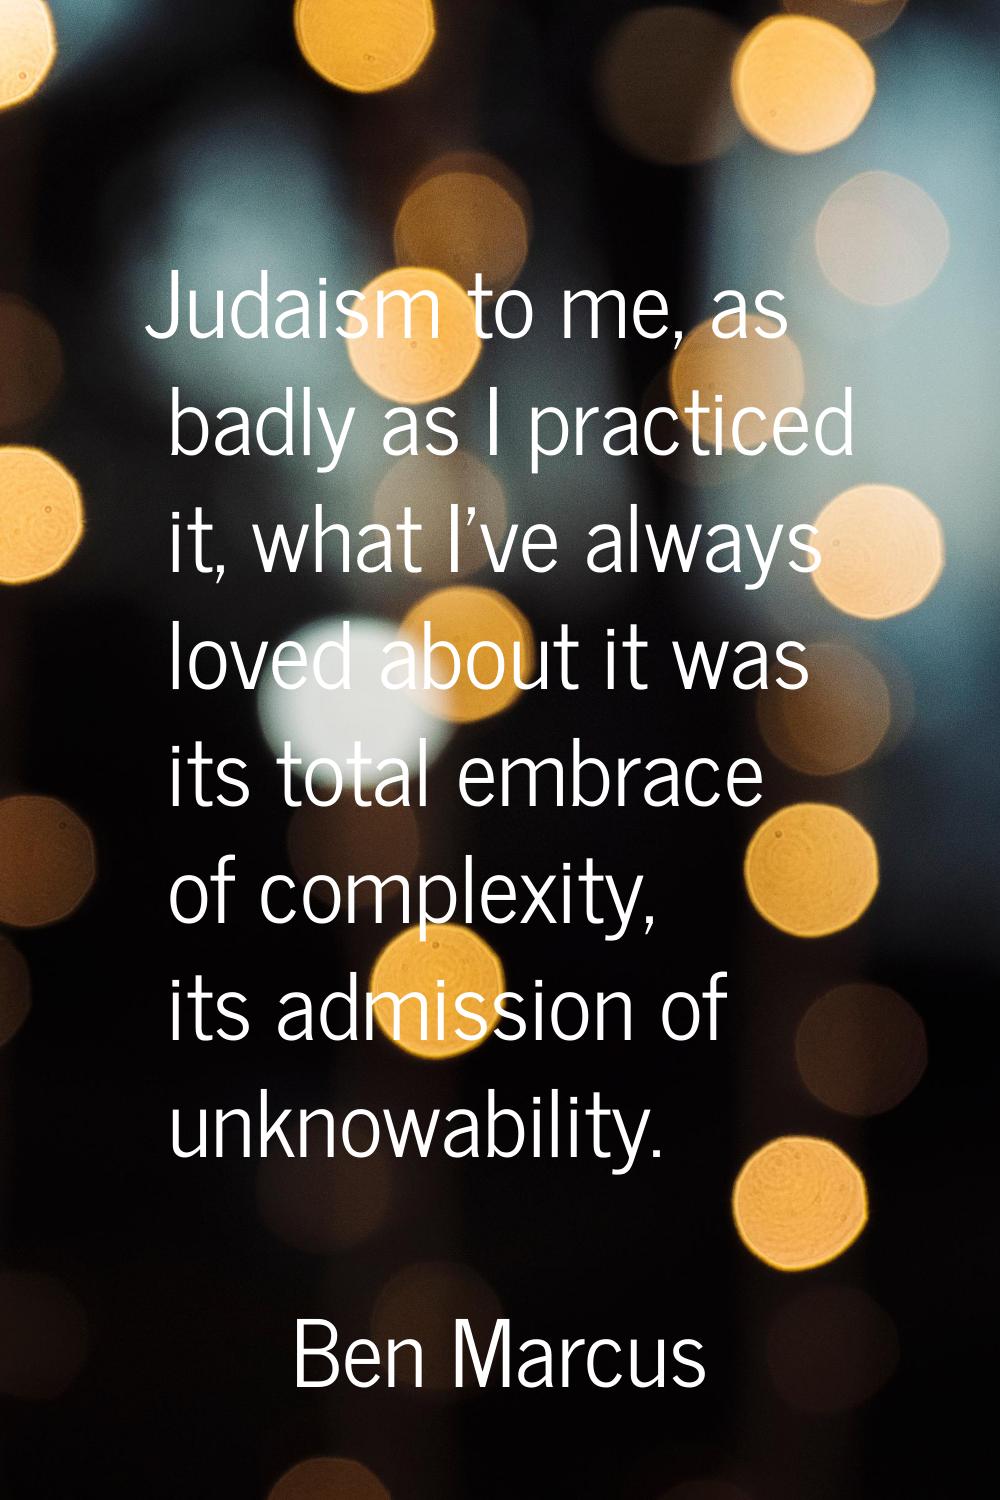 Judaism to me, as badly as I practiced it, what I've always loved about it was its total embrace of